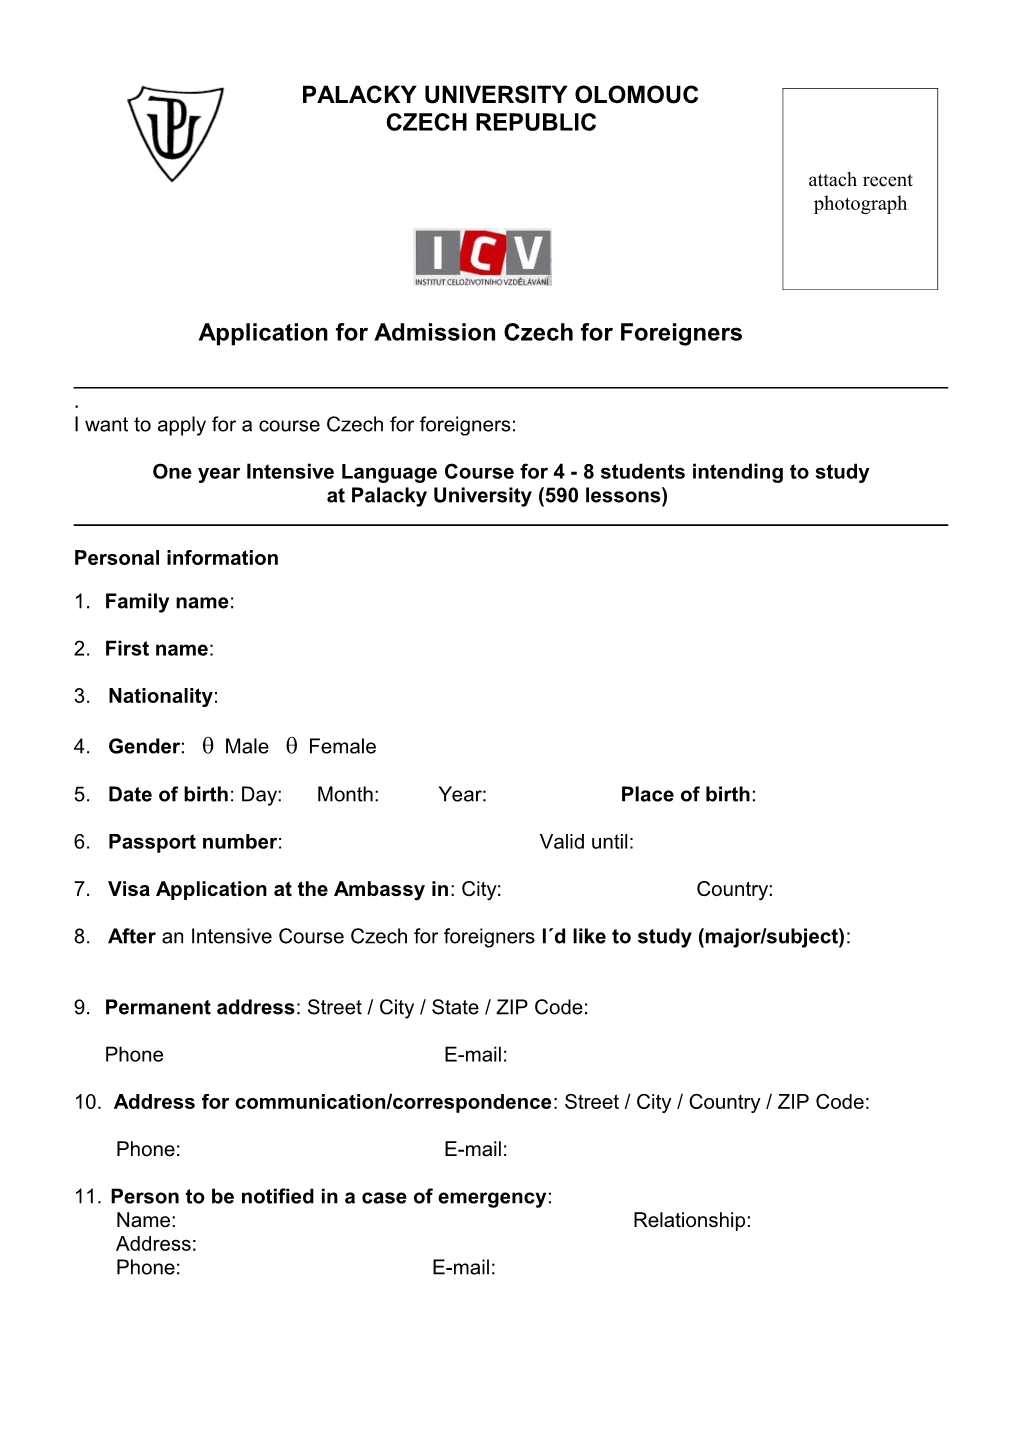 Application for Admission Czech for Foreigners